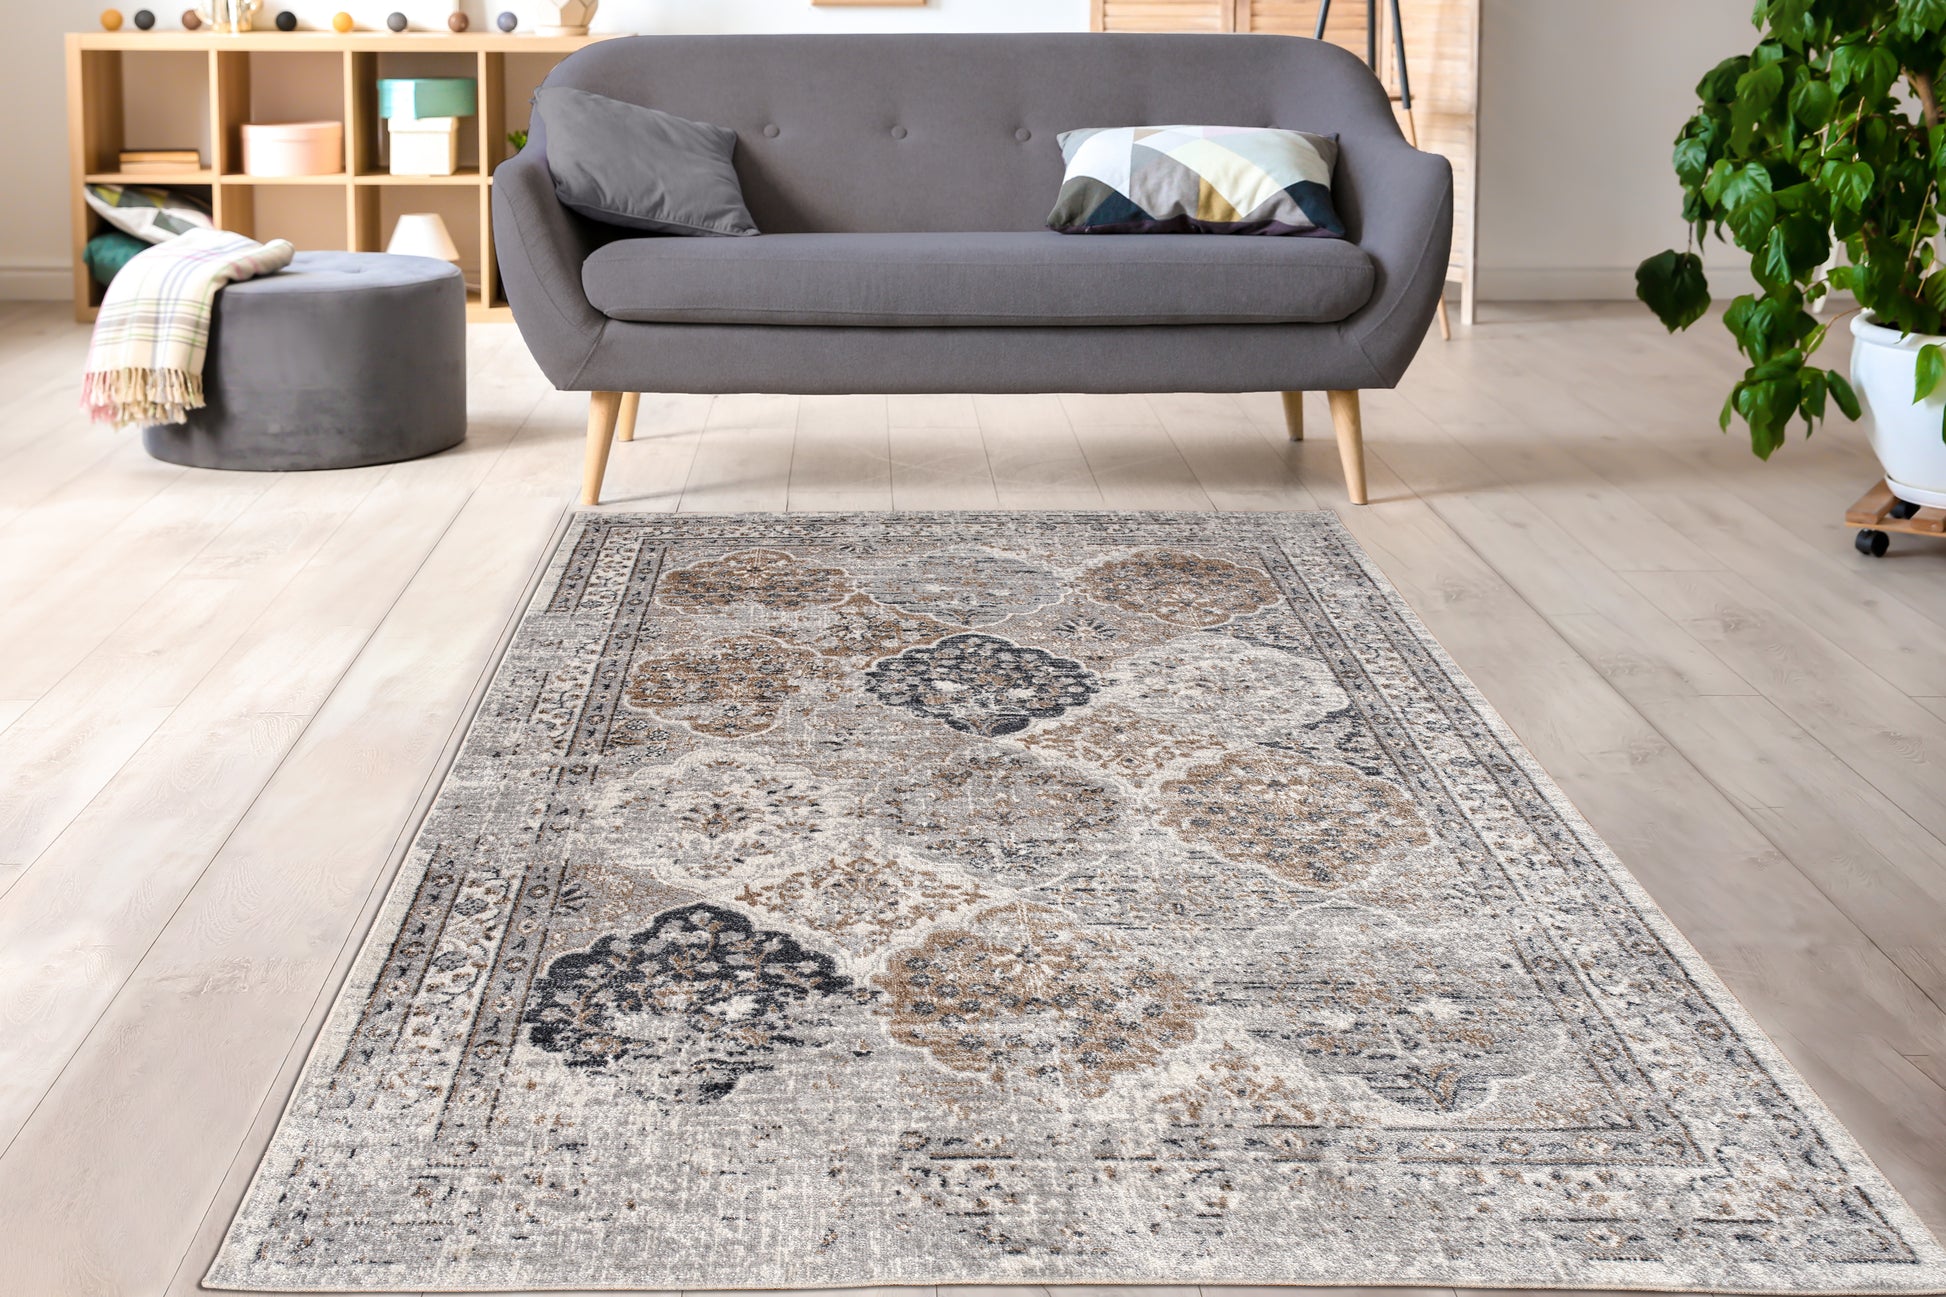 blue ivory brown machine washable boho traditional area rug for living room bedroom 5x7, 5x8 ft Contemporary, Living Room Carpet, Bedroom, Home Office